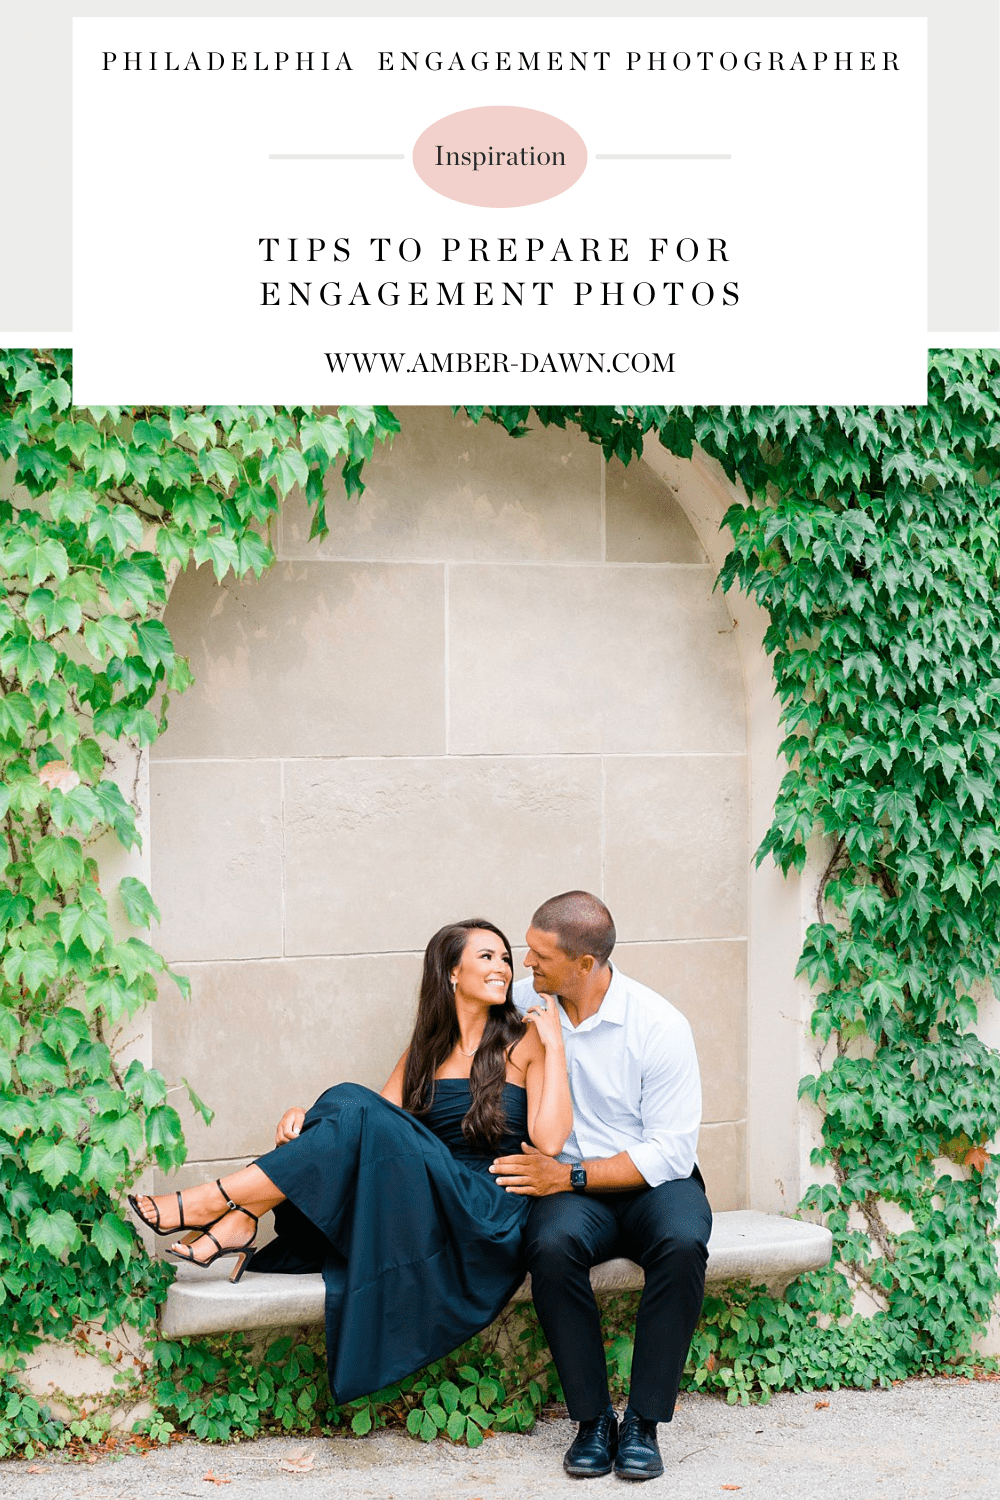 Tips to prepare for engagement photos by PA engagement photographer Amber Dawn